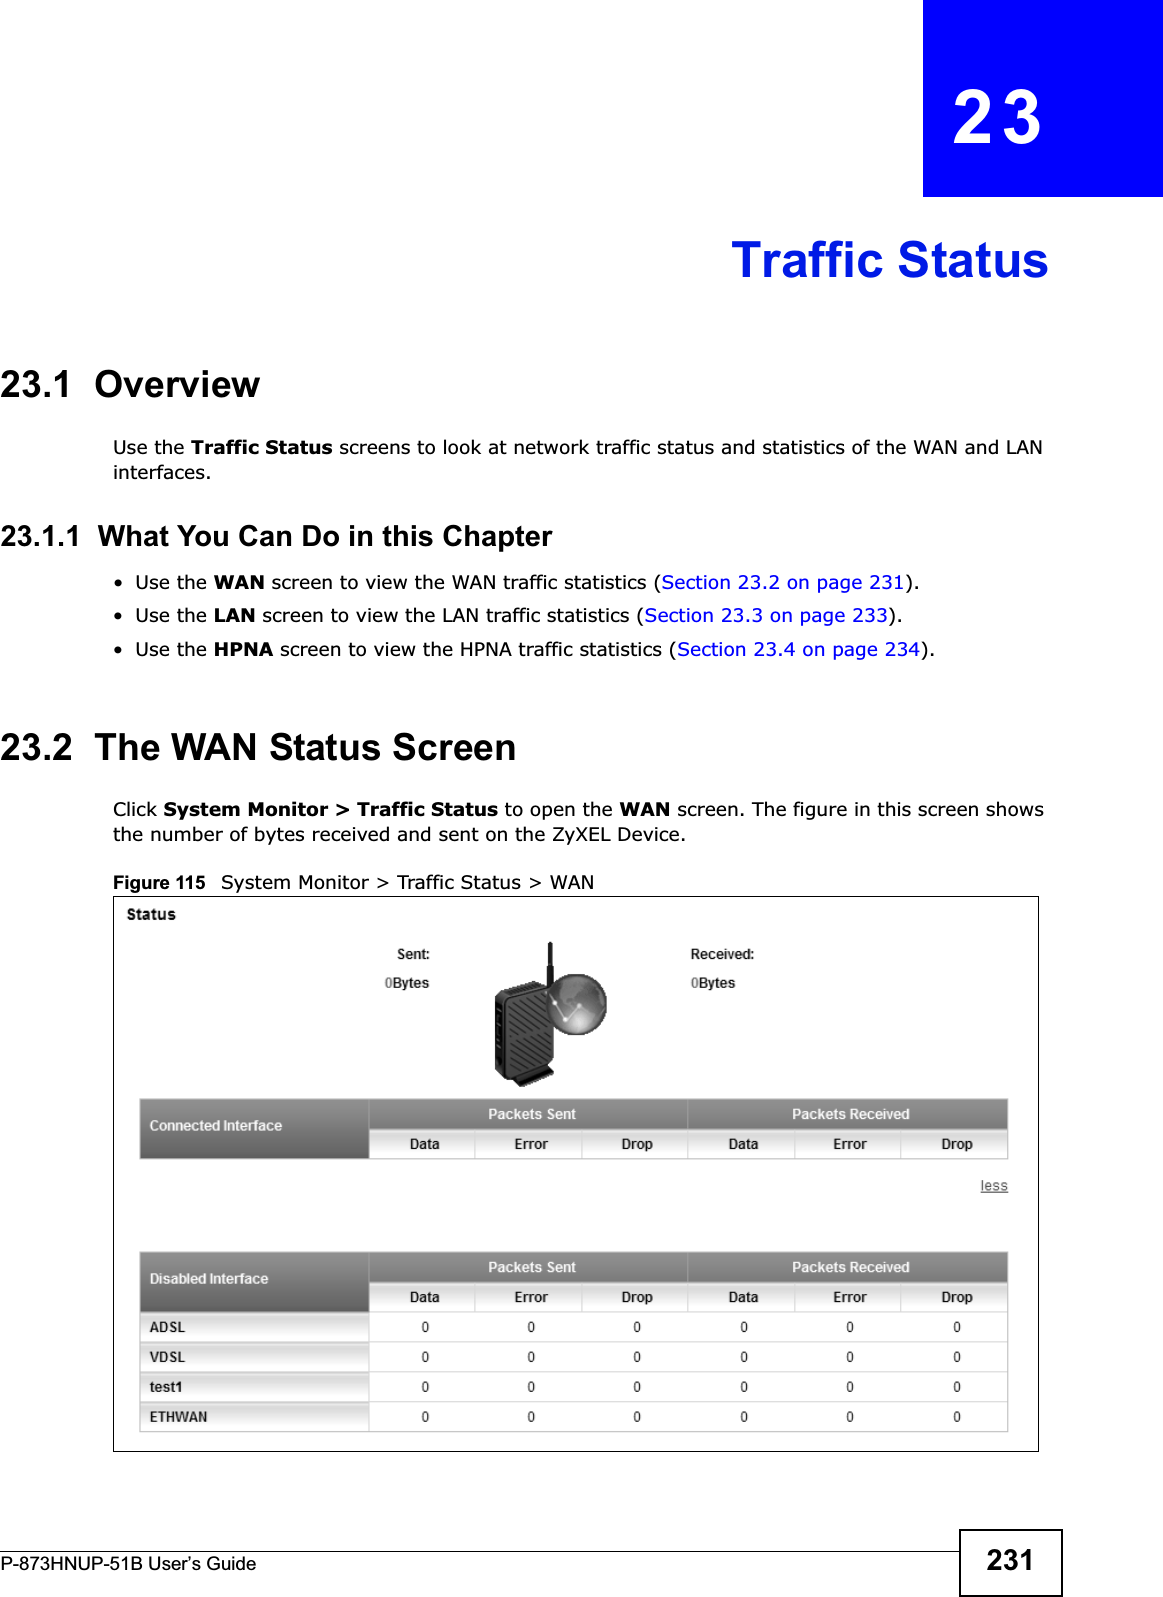 P-873HNUP-51B User’s Guide 231CHAPTER   23Traffic Status23.1  OverviewUse the Traffic Status screens to look at network traffic status and statistics of the WAN and LAN interfaces.23.1.1  What You Can Do in this Chapter•Use the WAN screen to view the WAN traffic statistics (Section 23.2 on page 231).•Use the LAN screen to view the LAN traffic statistics (Section 23.3 on page 233).•Use the HPNA screen to view the HPNA traffic statistics (Section 23.4 on page 234).23.2  The WAN Status Screen Click System Monitor &gt; Traffic Status to open the WAN screen. The figure in this screen shows the number of bytes received and sent on the ZyXEL Device.Figure 115   System Monitor &gt; Traffic Status &gt; WAN